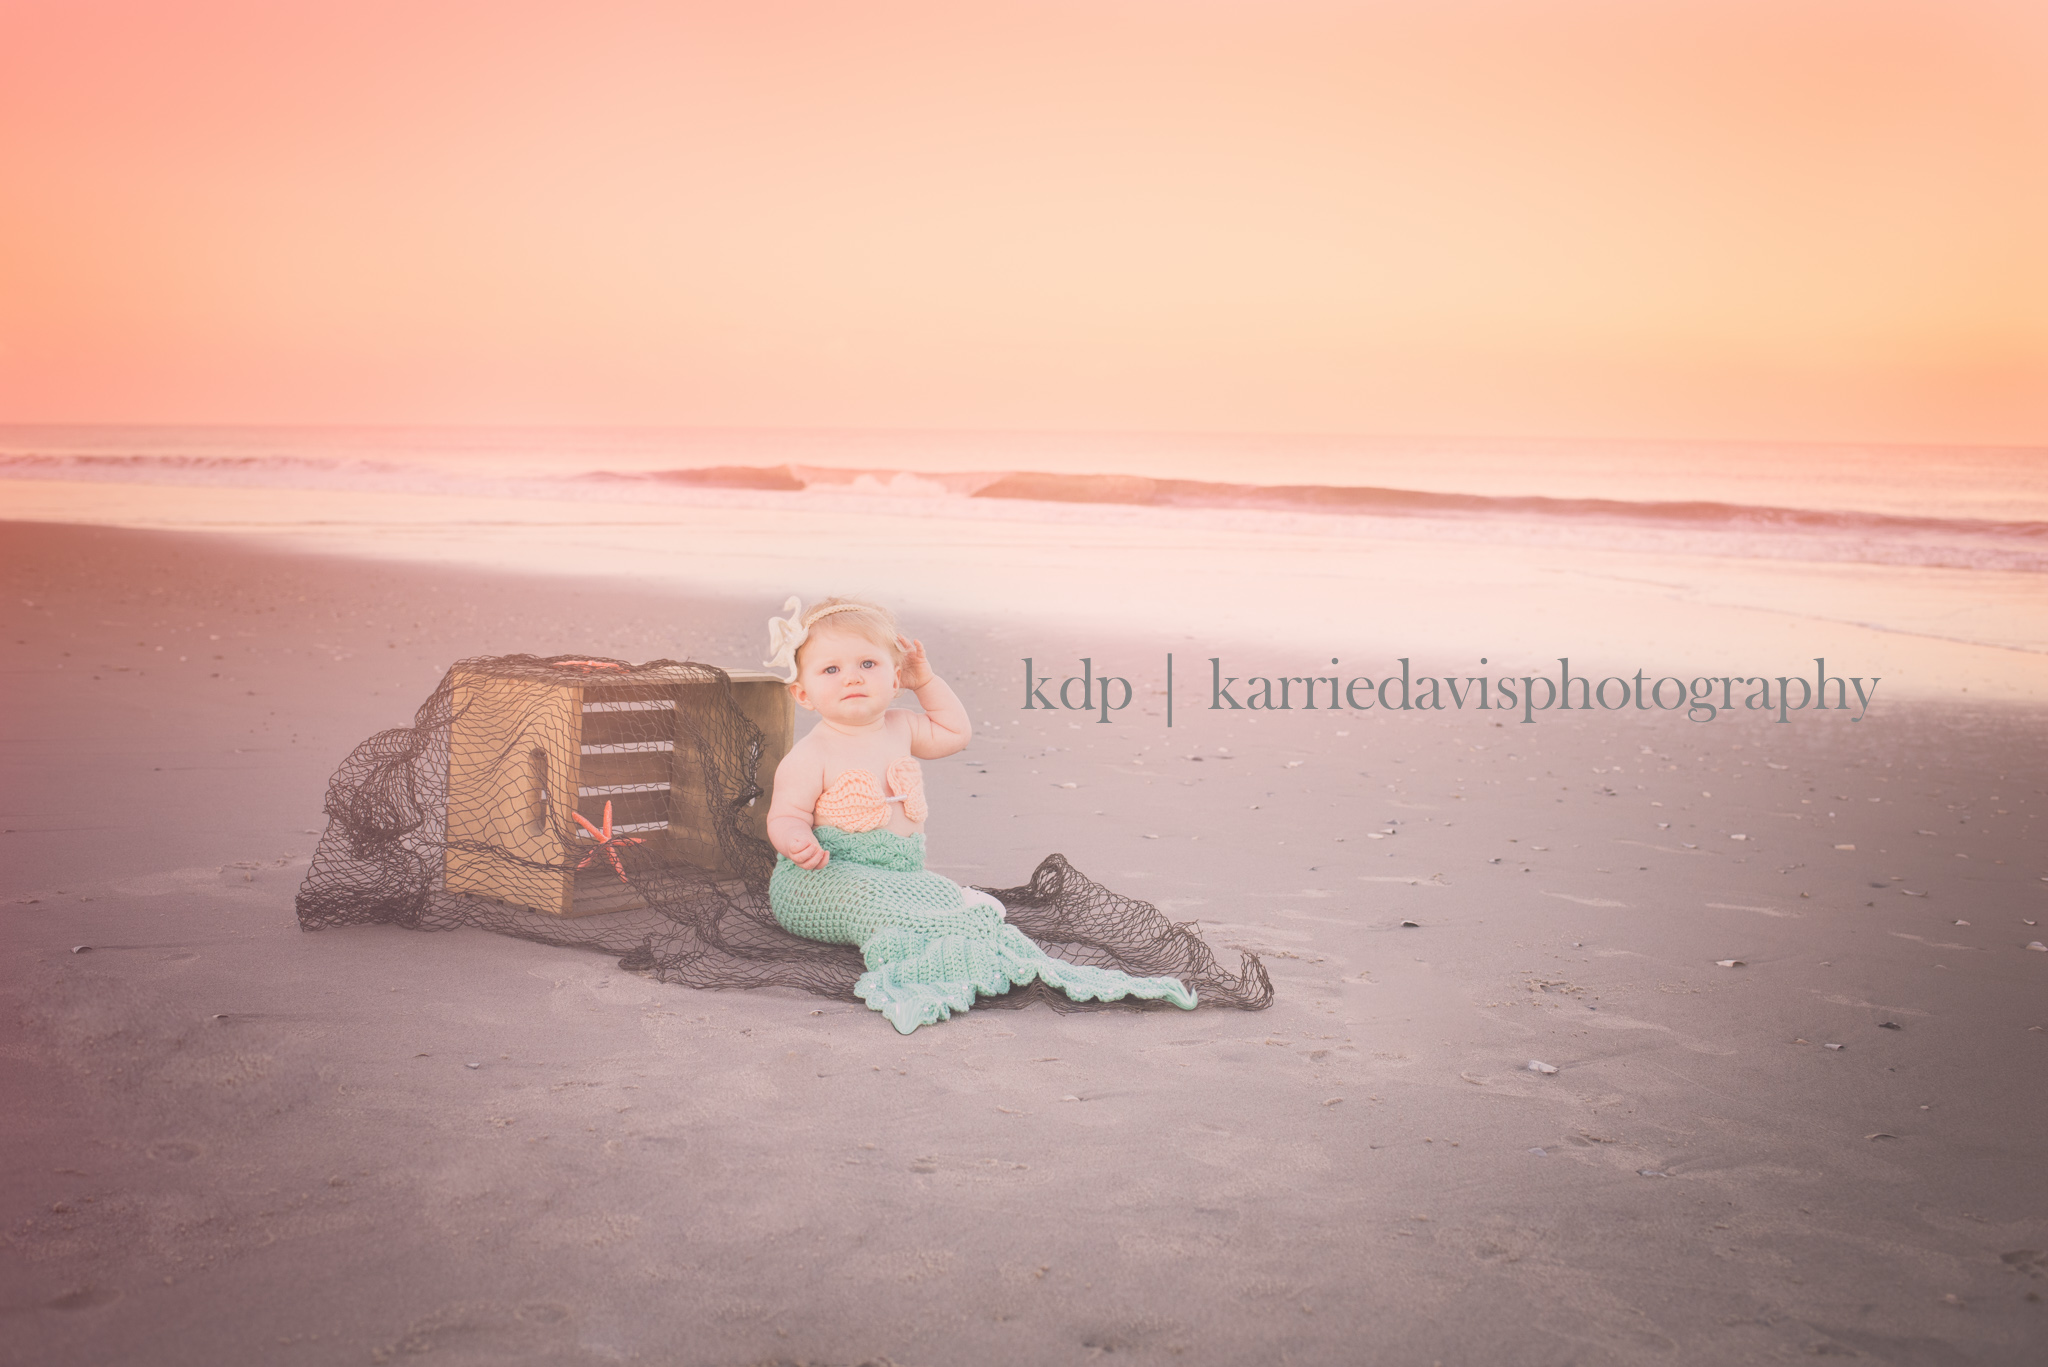 mermaid photography on the beach. Loved this mermaid outfit for this infant and the seashell bikinis too.